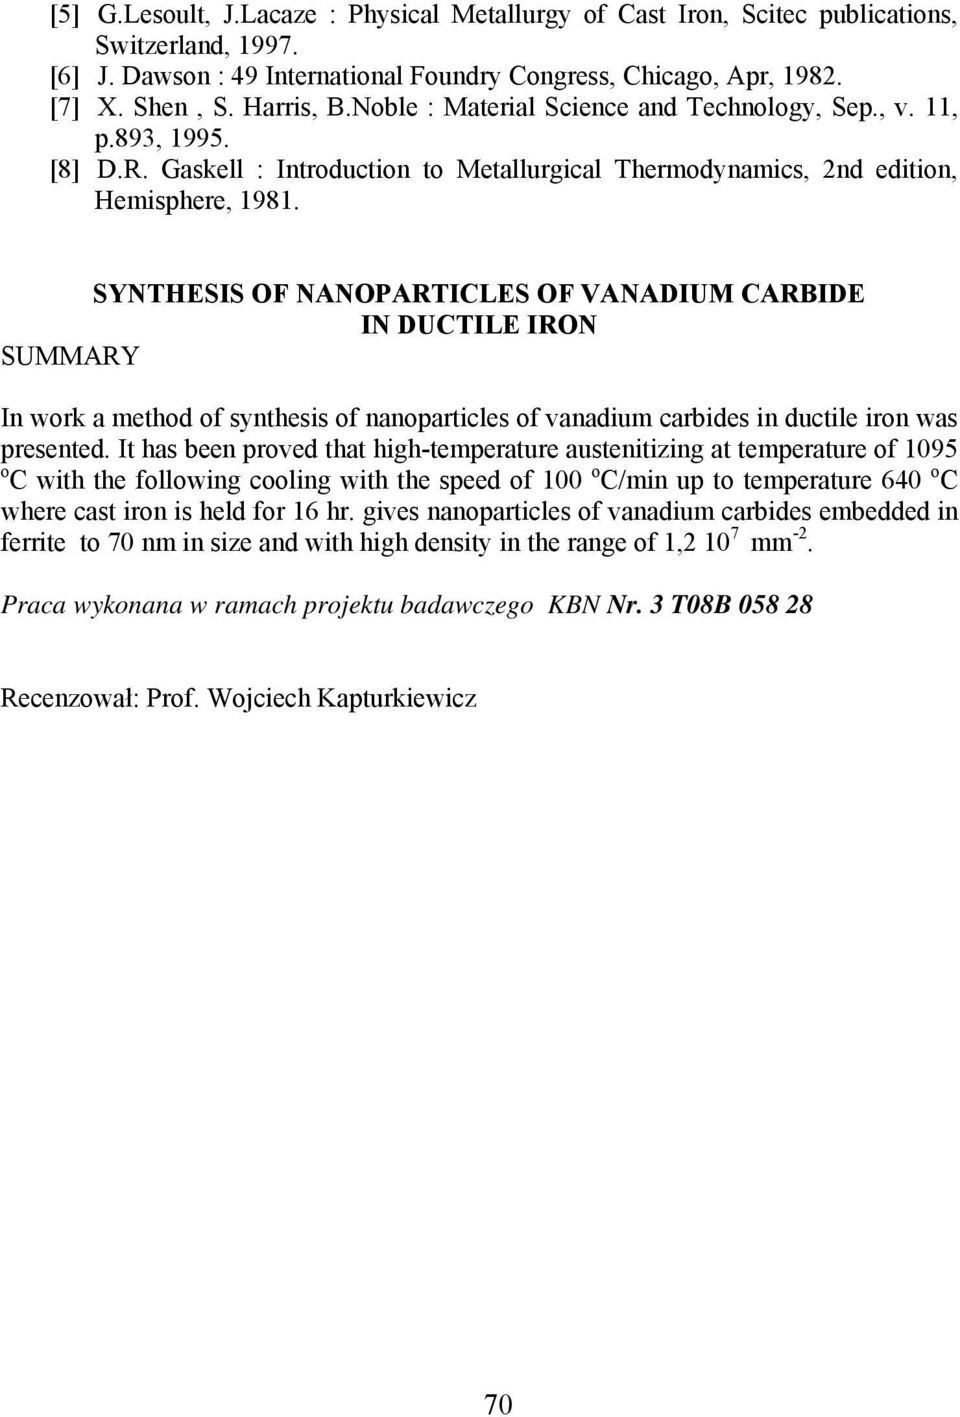 SYNTHESIS OF NANOPARTICLES OF VANADIUM CARBIDE IN DUCTILE IRON SUMMARY In work a method of synthesis of nanoparticles of vanadium carbides in ductile iron was presented.